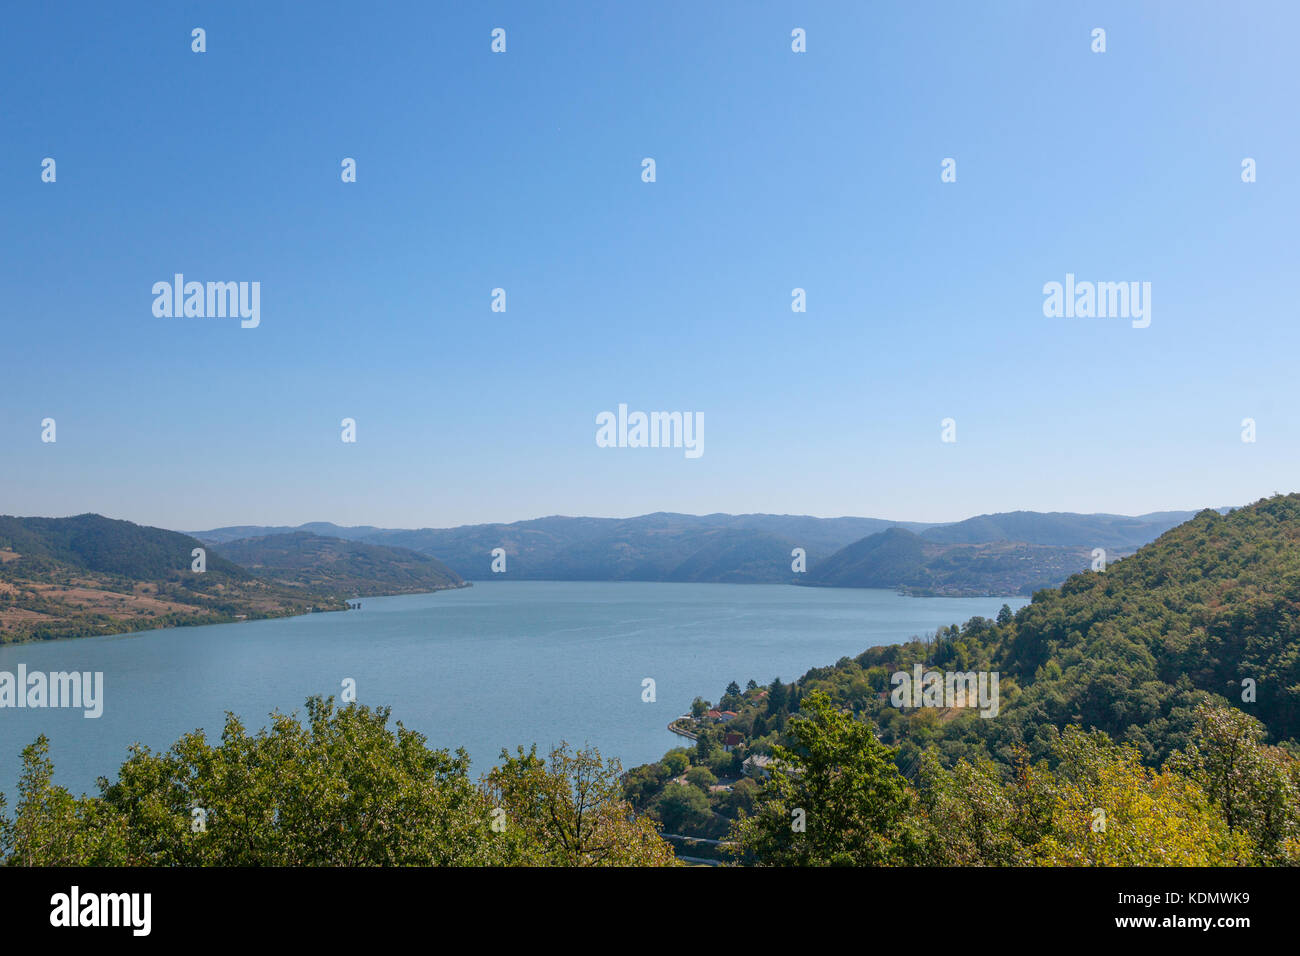 Danube river near the Serbian city of Donji Milanovac in the Iron Gates, also known as Djerdap, which are the Danube gorges, a natural symbol of the b Stock Photo